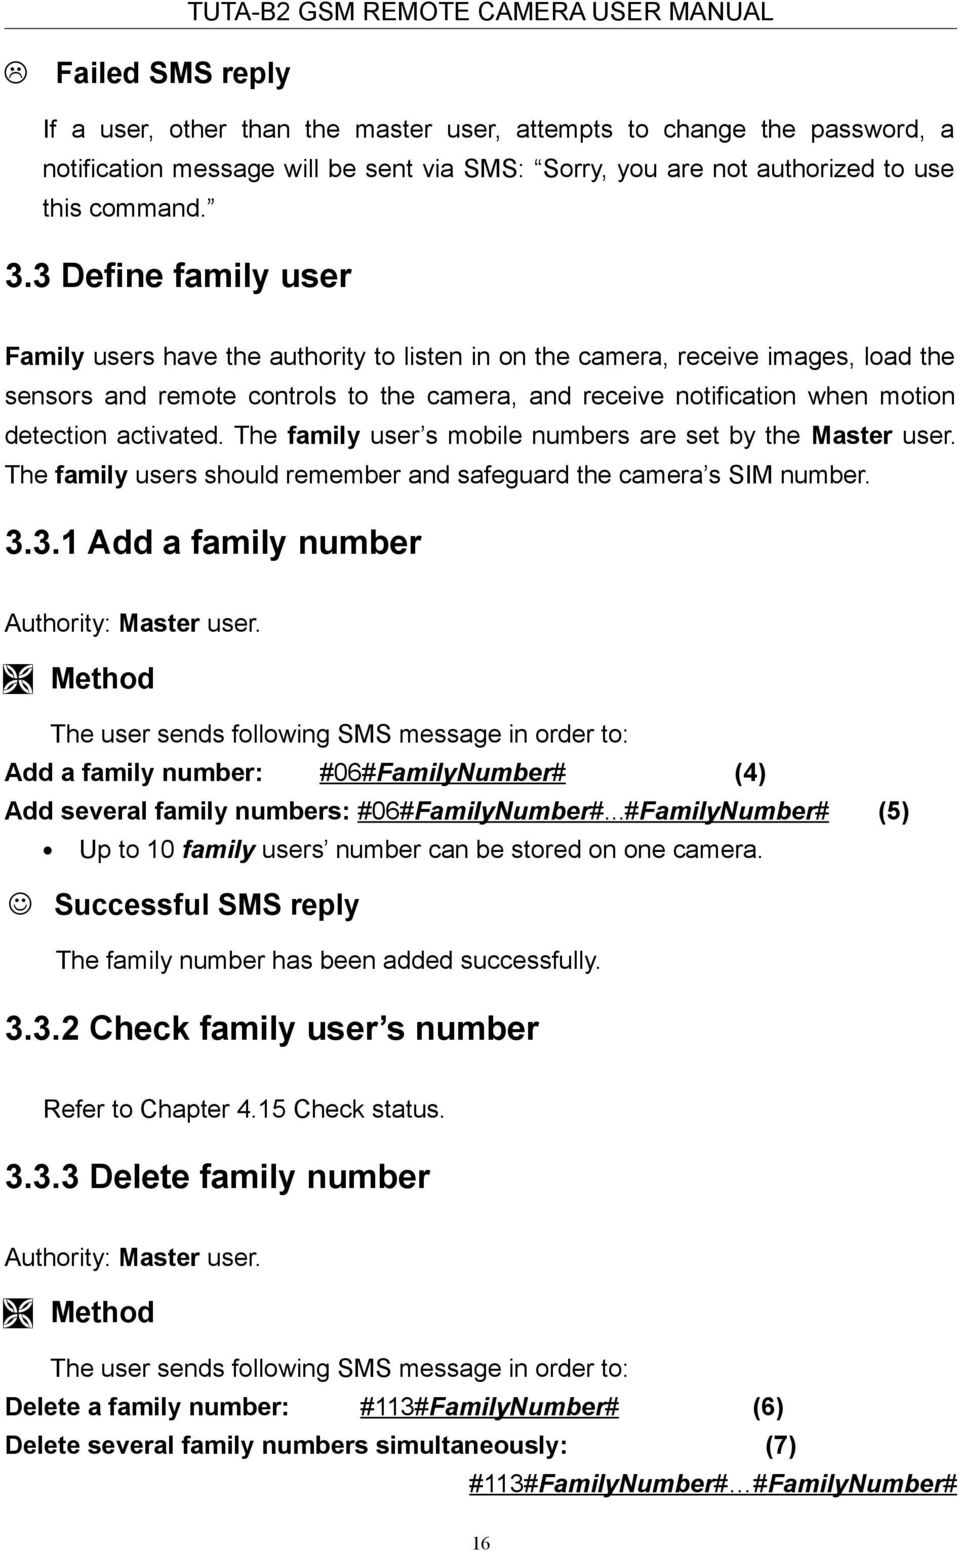 The family user s mobile numbers are set by the Master user. The family users should remember and safeguard the camera s SIM number. 3.3.1 Add a family number Authority: Master user.